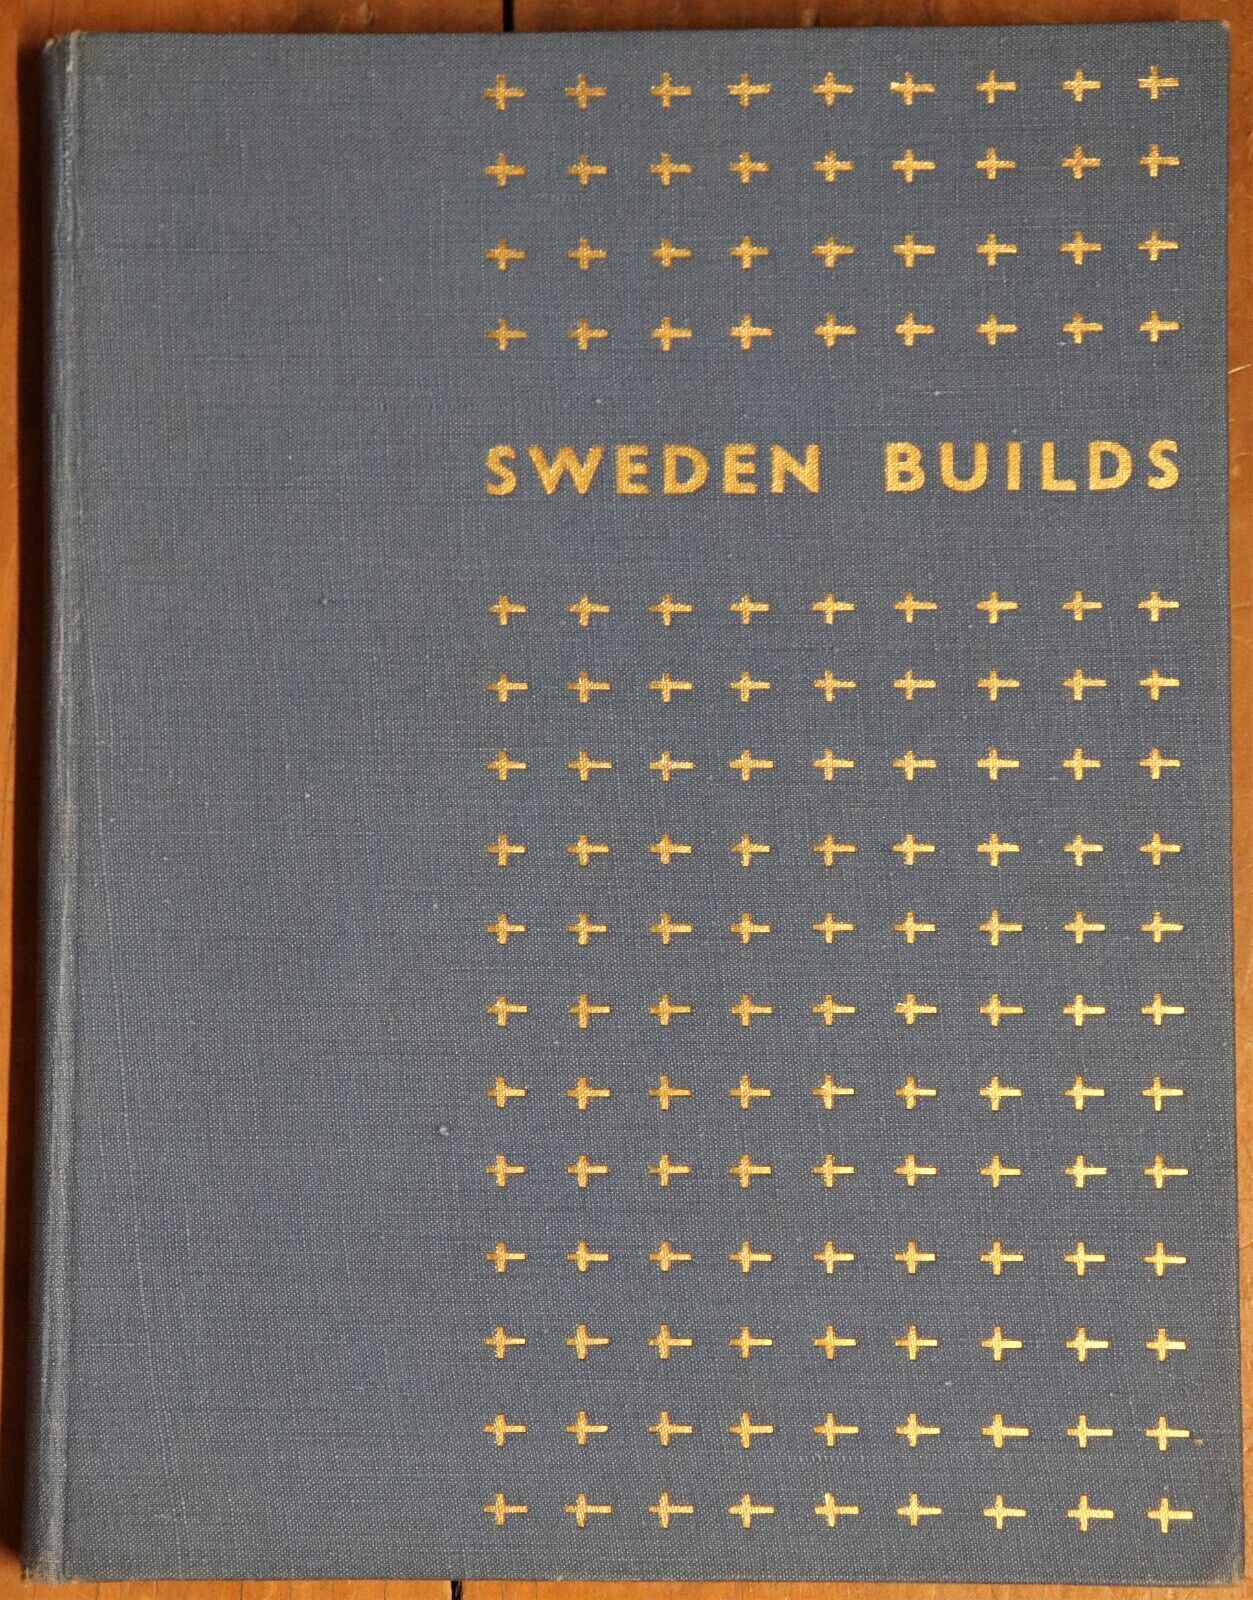 Sweden Builds: Modern Architecture & Land Policy - 1950 - Architecture Book